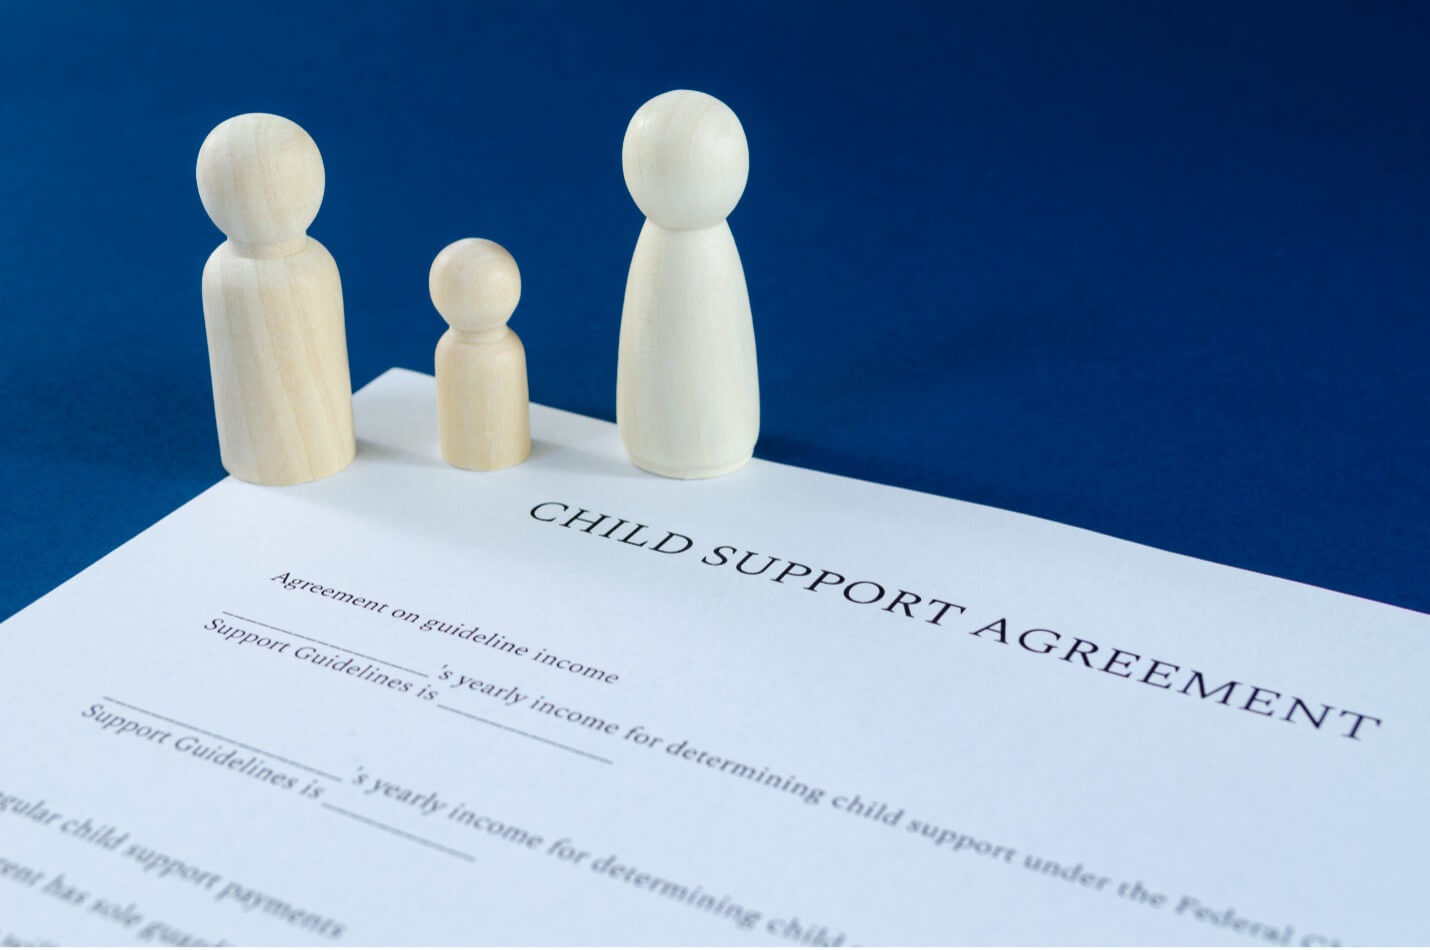 Child support agreement with family figures - Easysoft Family Law - Massachusetts